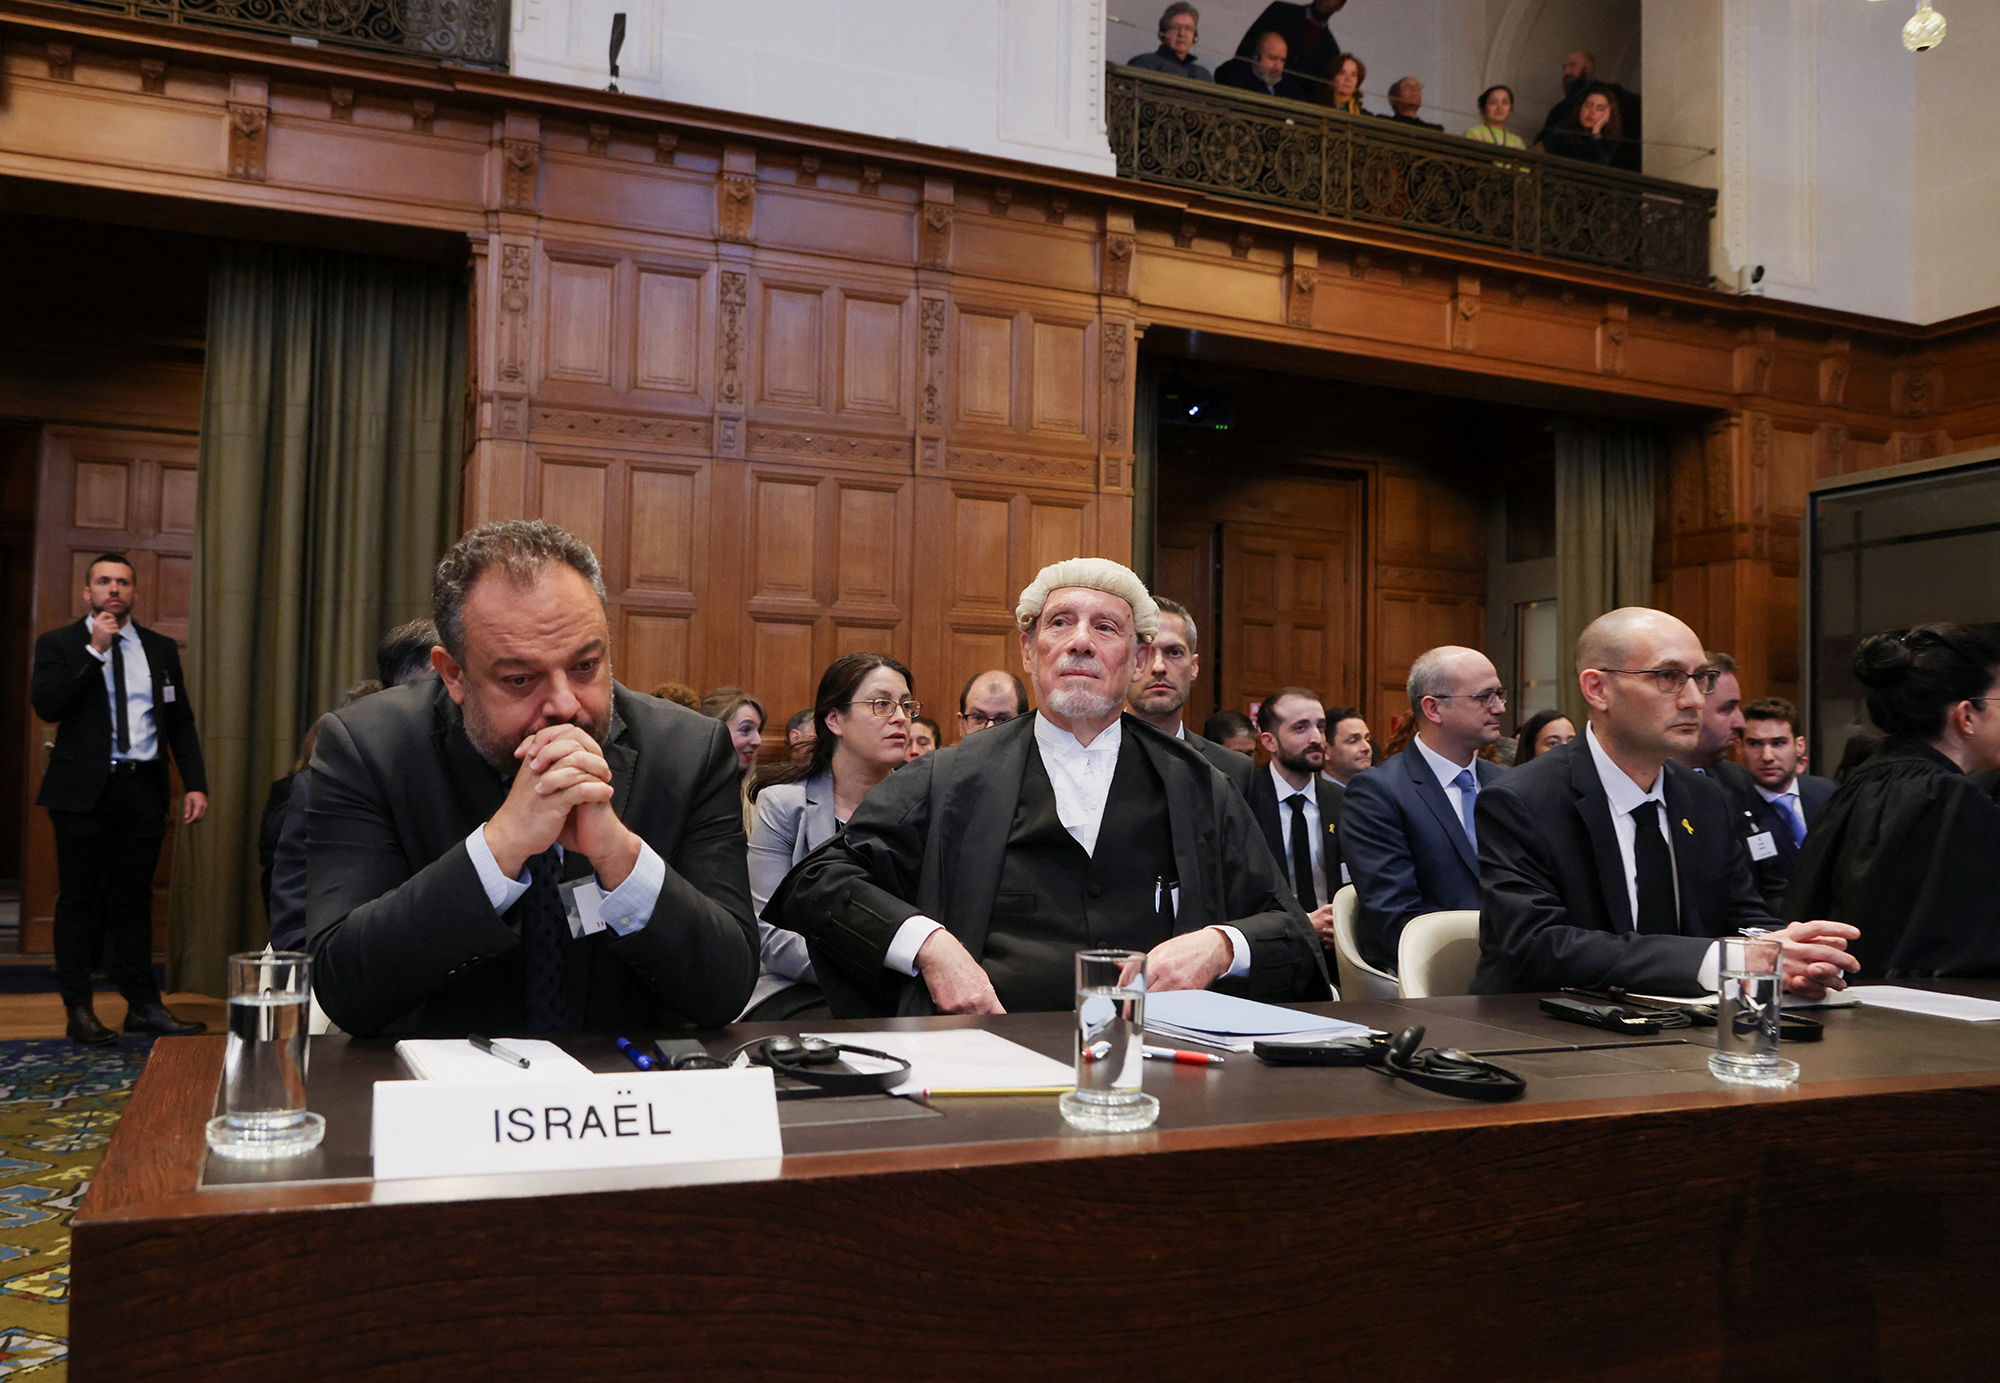 British jurist Malcom Shaw, center, legal adviser to Israel's Foreign Ministry Tal Becker, left, and Israel's deputy attorney-general for international law Gilad Noam look on as judges at the International Court of Justice (ICJ) hear a request for emergency measures by South Africa in The Hague, Netherlands, on January 11.